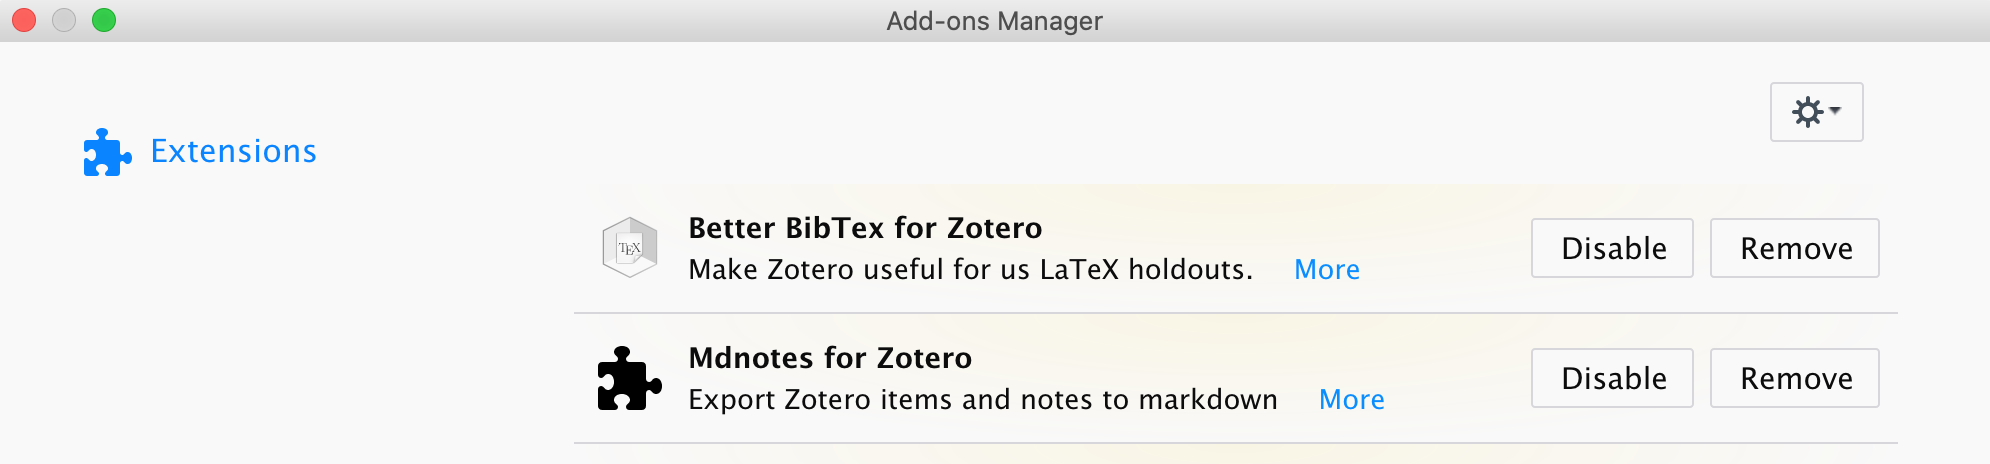 Configure mdnotes updates in the Add-ons Manager of Zotero